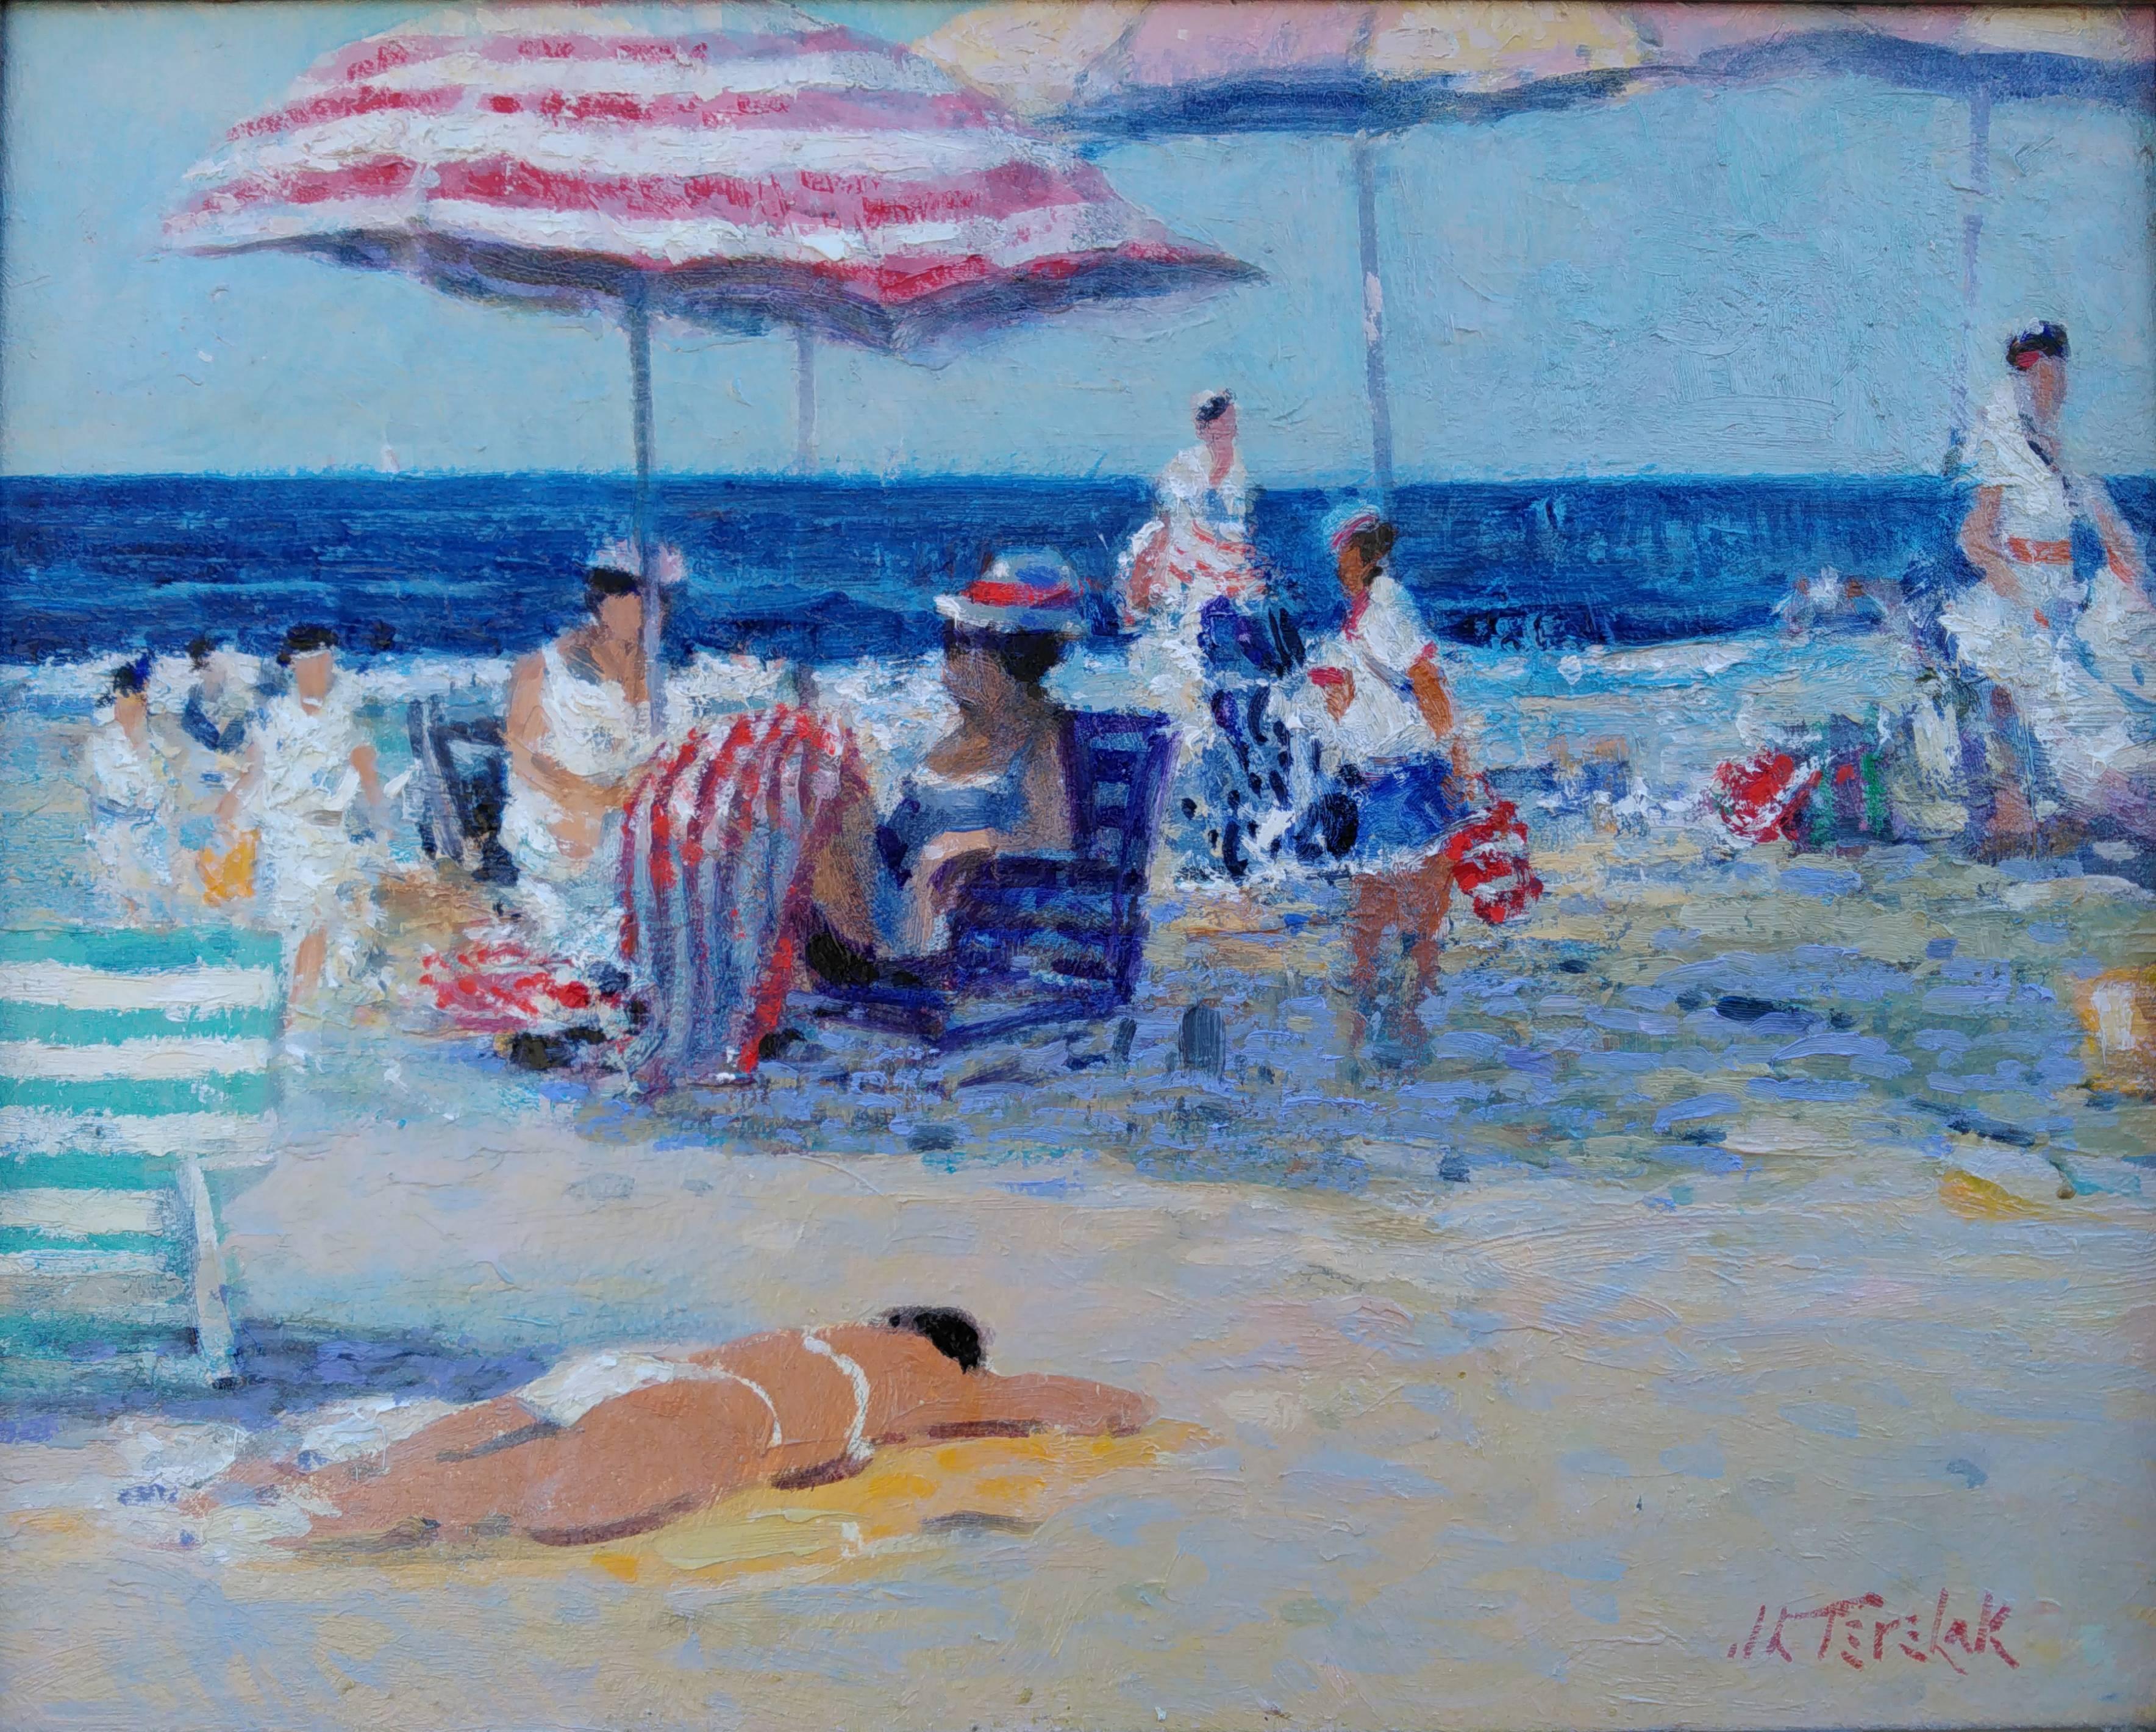 A Day at the Beach, Nantucket - Painting by John Terelak